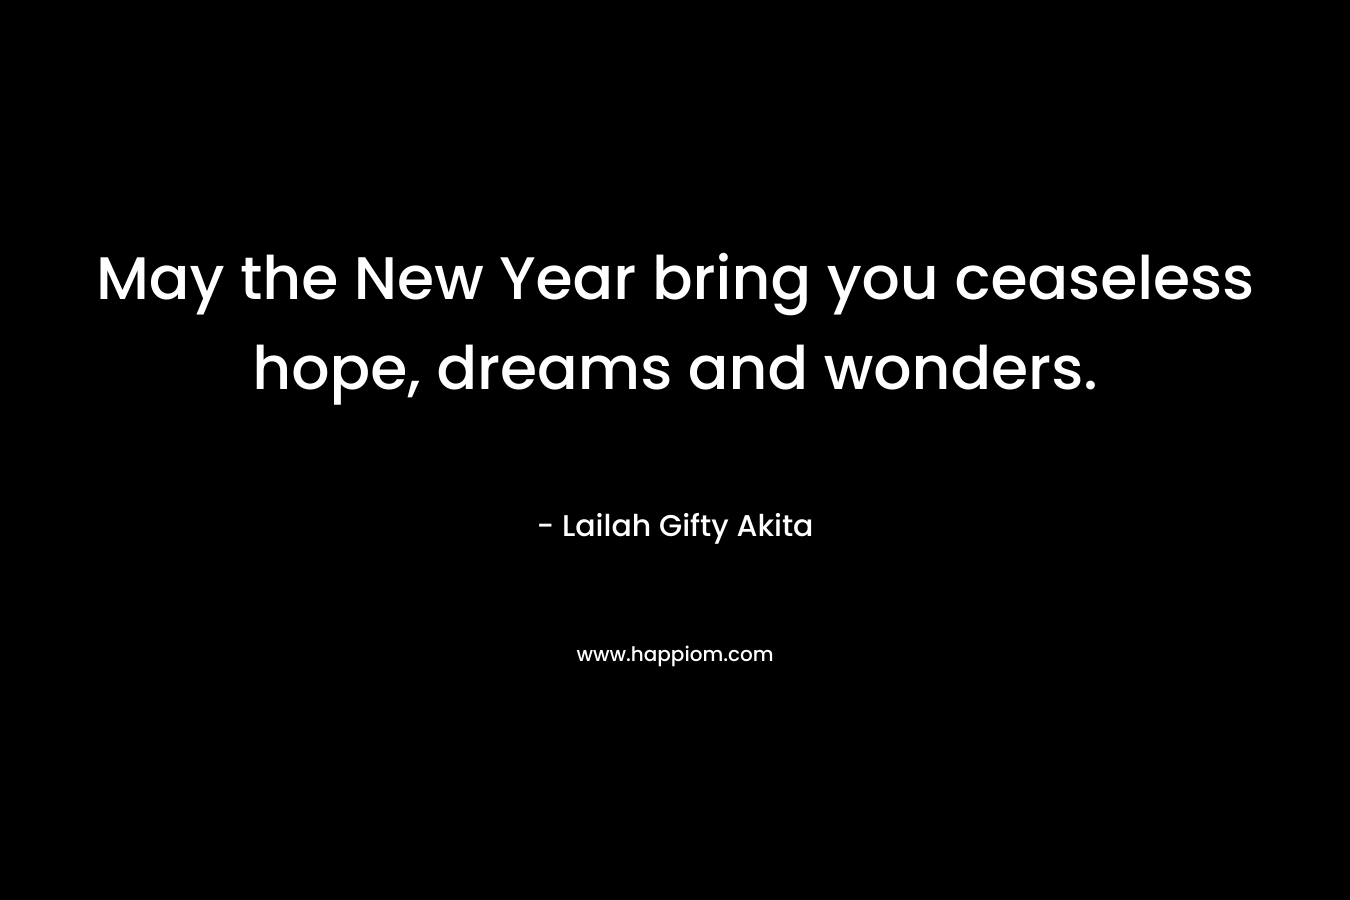 May the New Year bring you ceaseless hope, dreams and wonders.